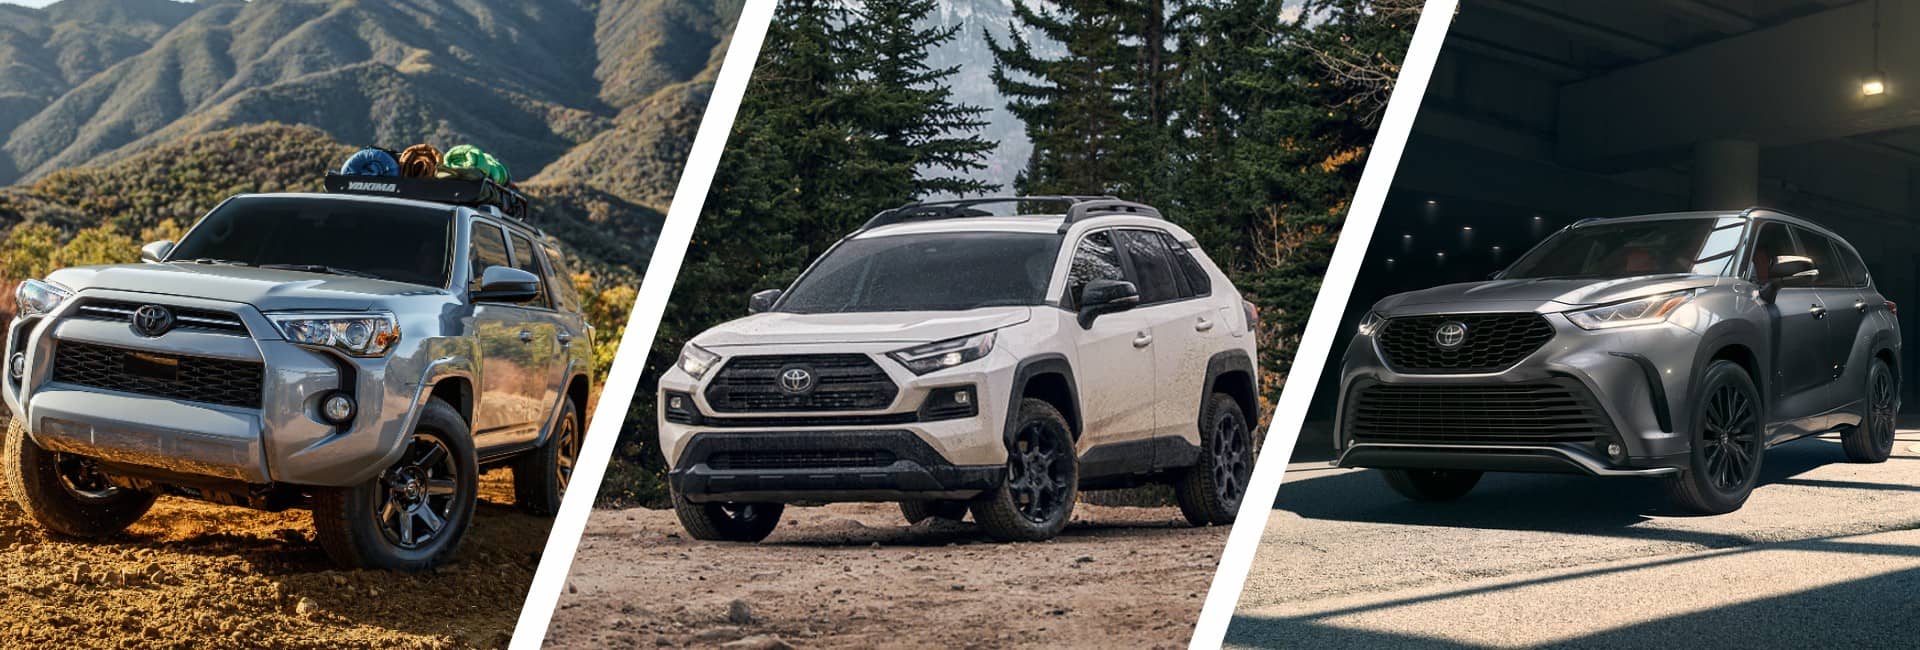 Used Toyota SUV Models | St. Cloud, MN